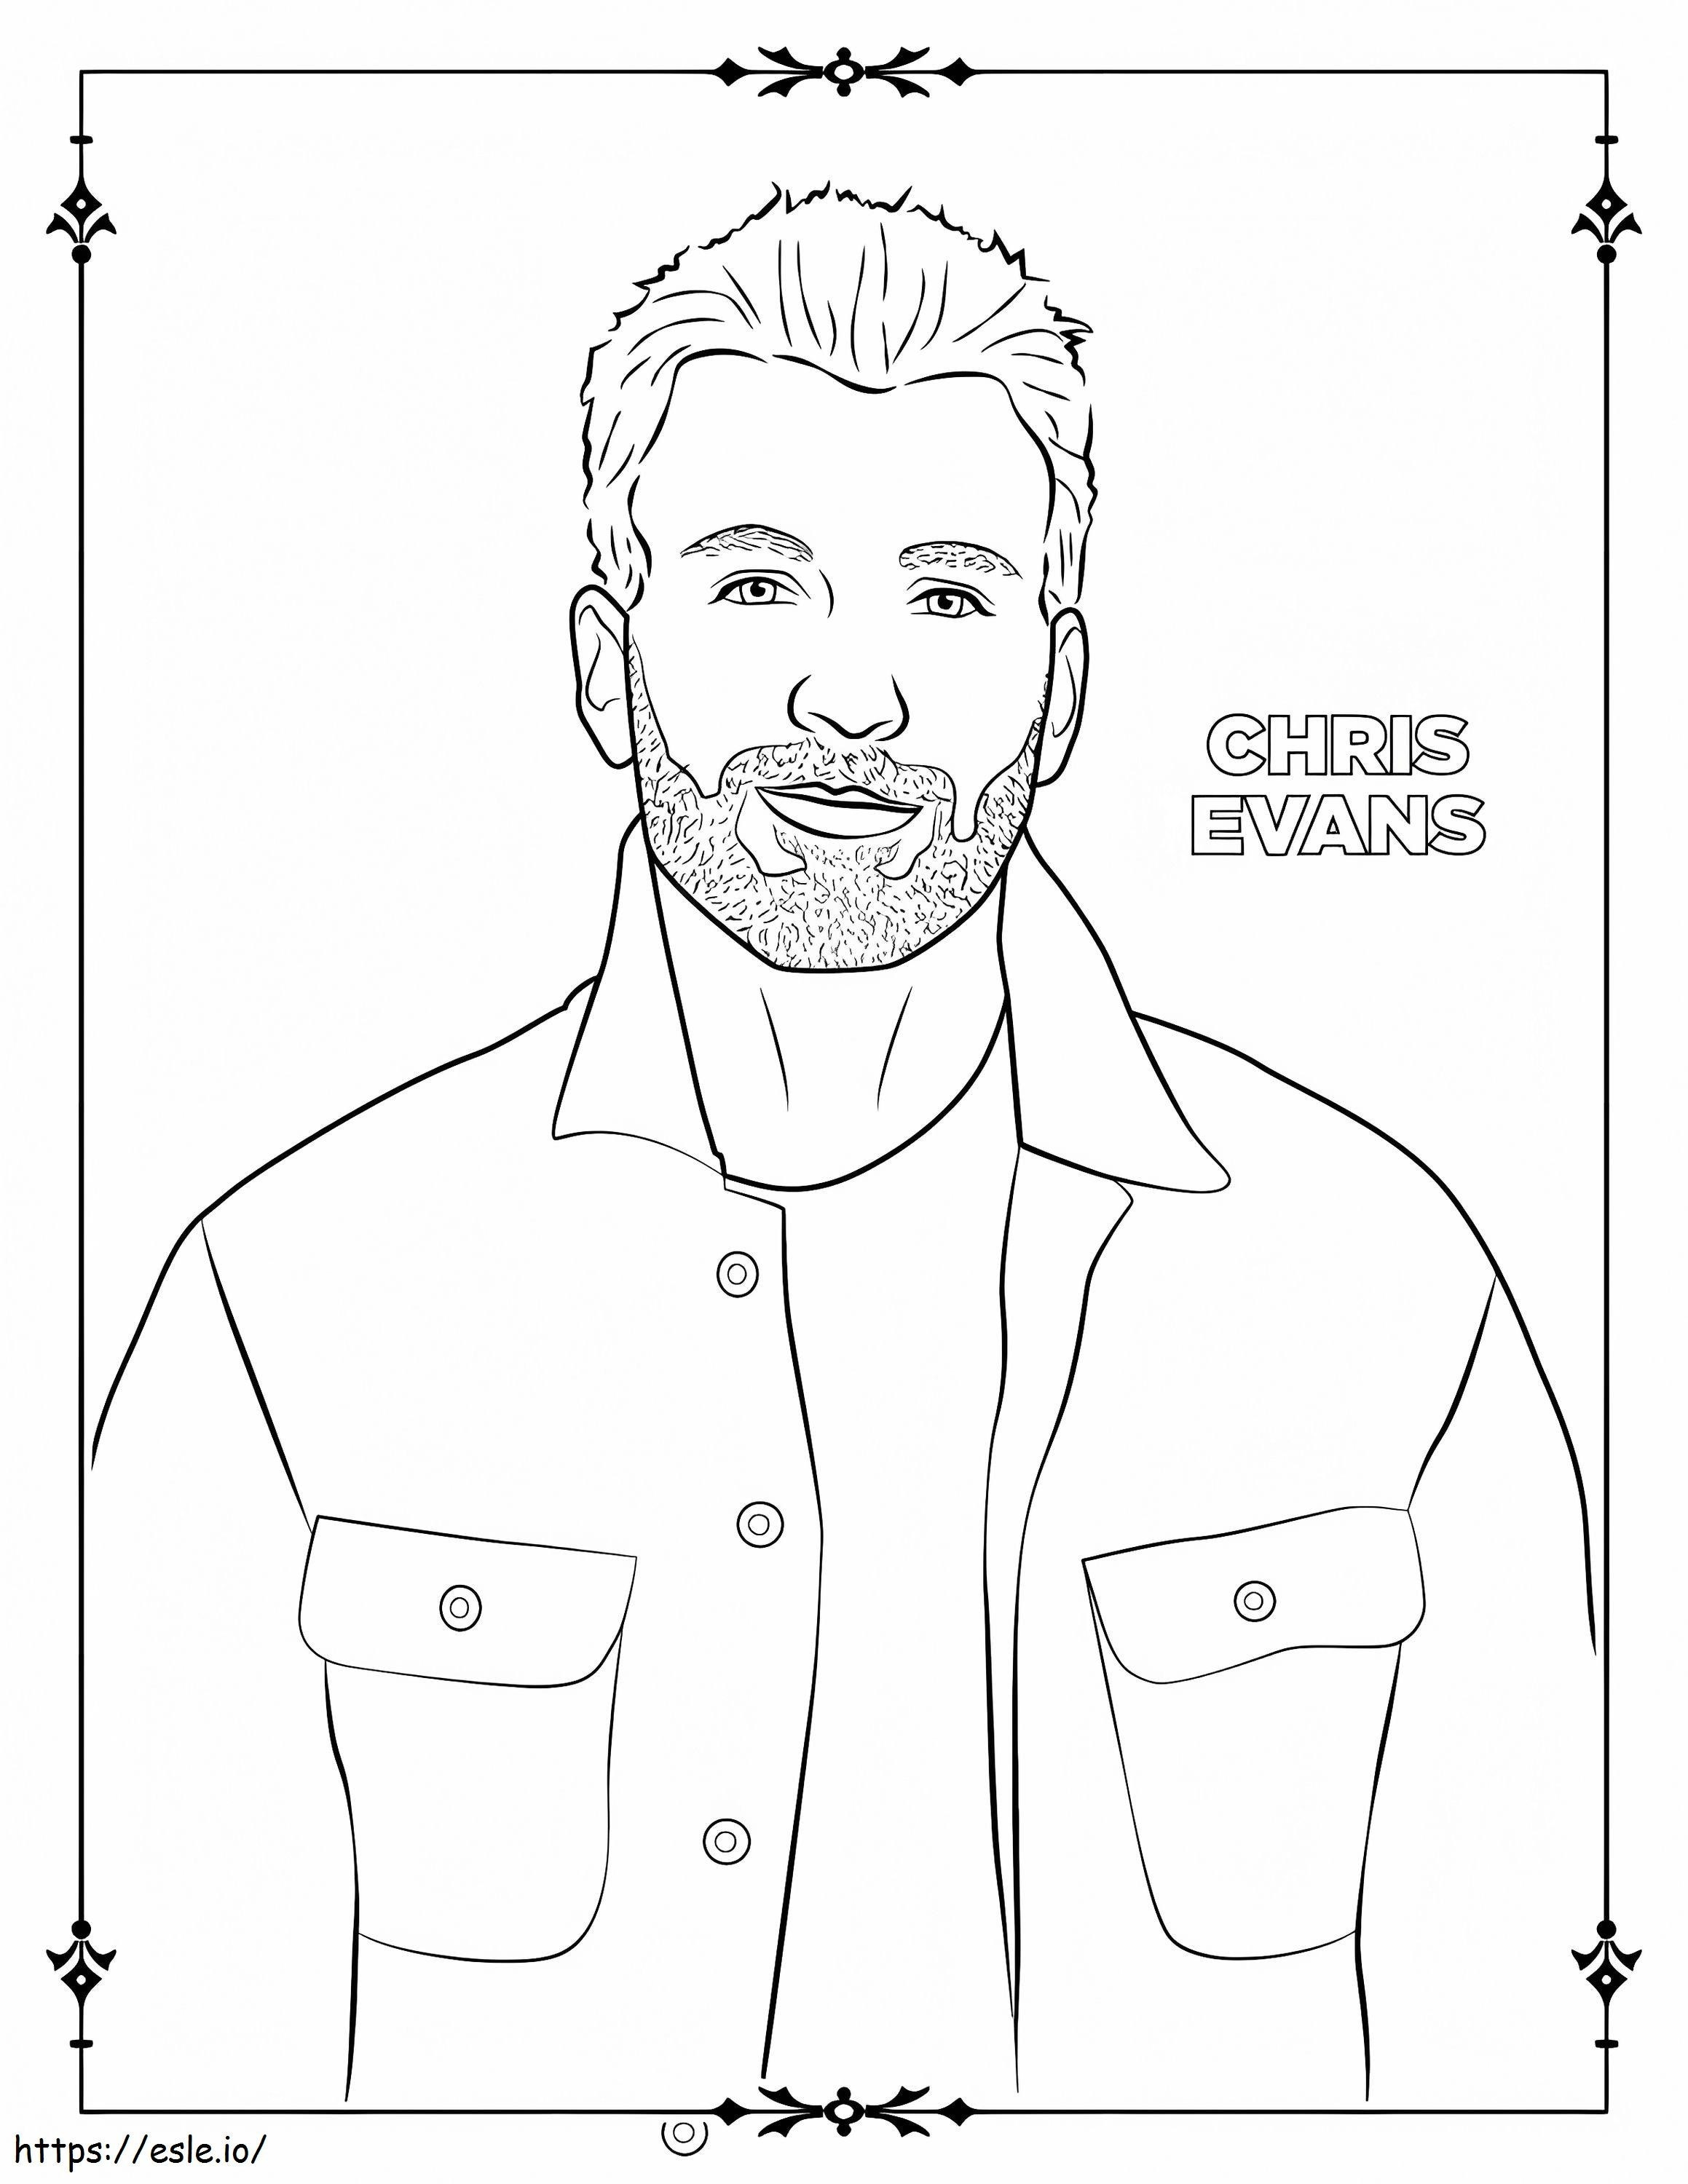 To43Rcacbgiyeqzcr3Ei coloring page